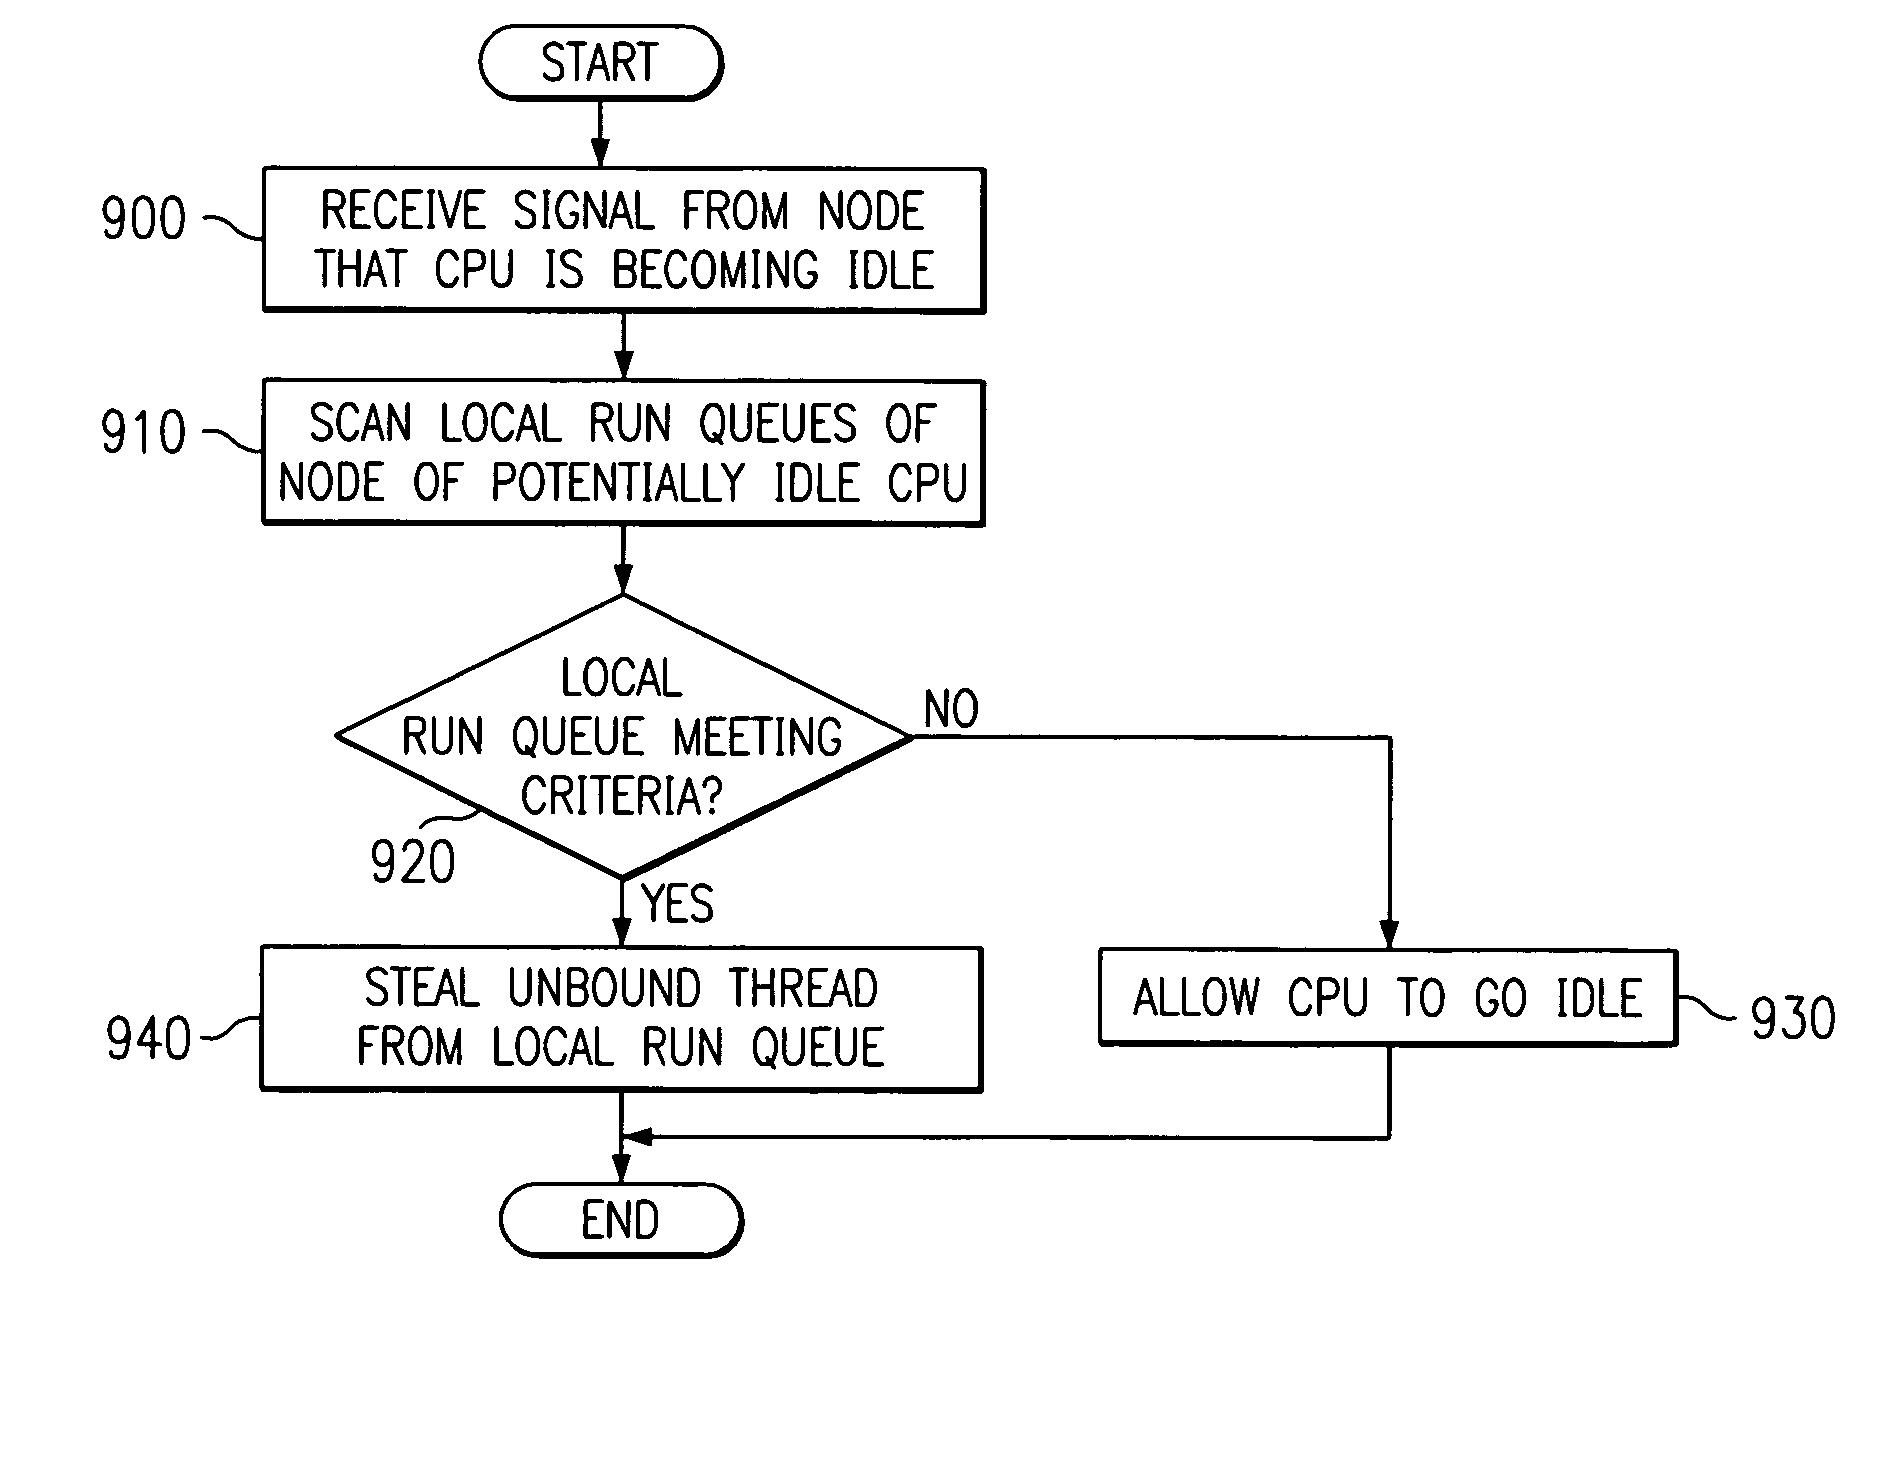 Method for determining idle processor load balancing in a multiple processors system